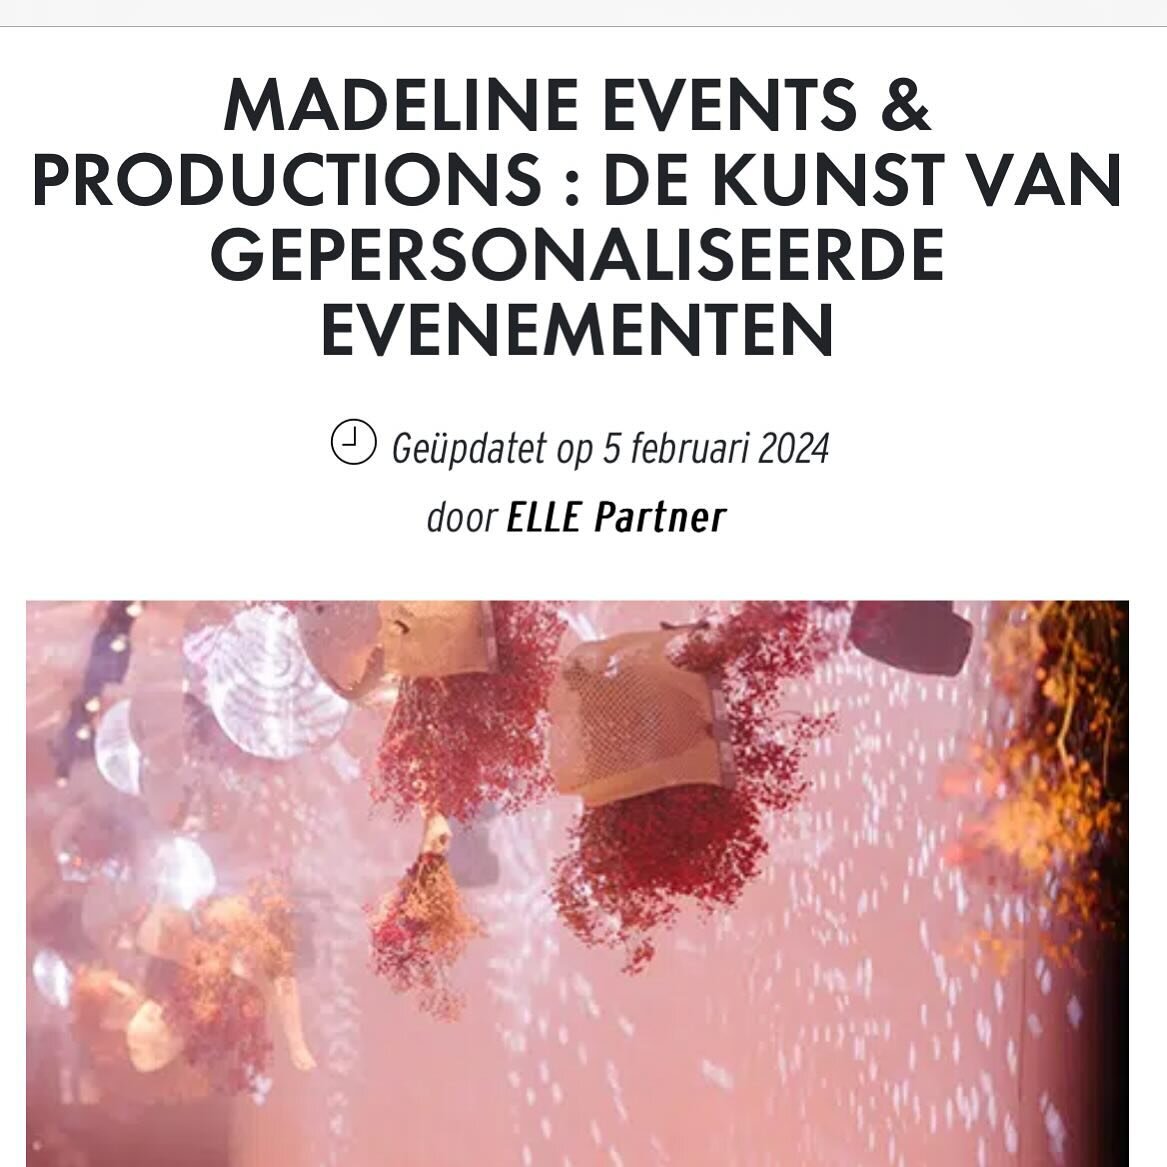 Published in ELLE magazine 😍💜
Dreams do come true. 
Read the article in our bio ✨ 
Thank you to all our wonderful partners &amp; clients who are part of the reason that we can create magic at our events. 
A a special thank you to @delphine___de__ge